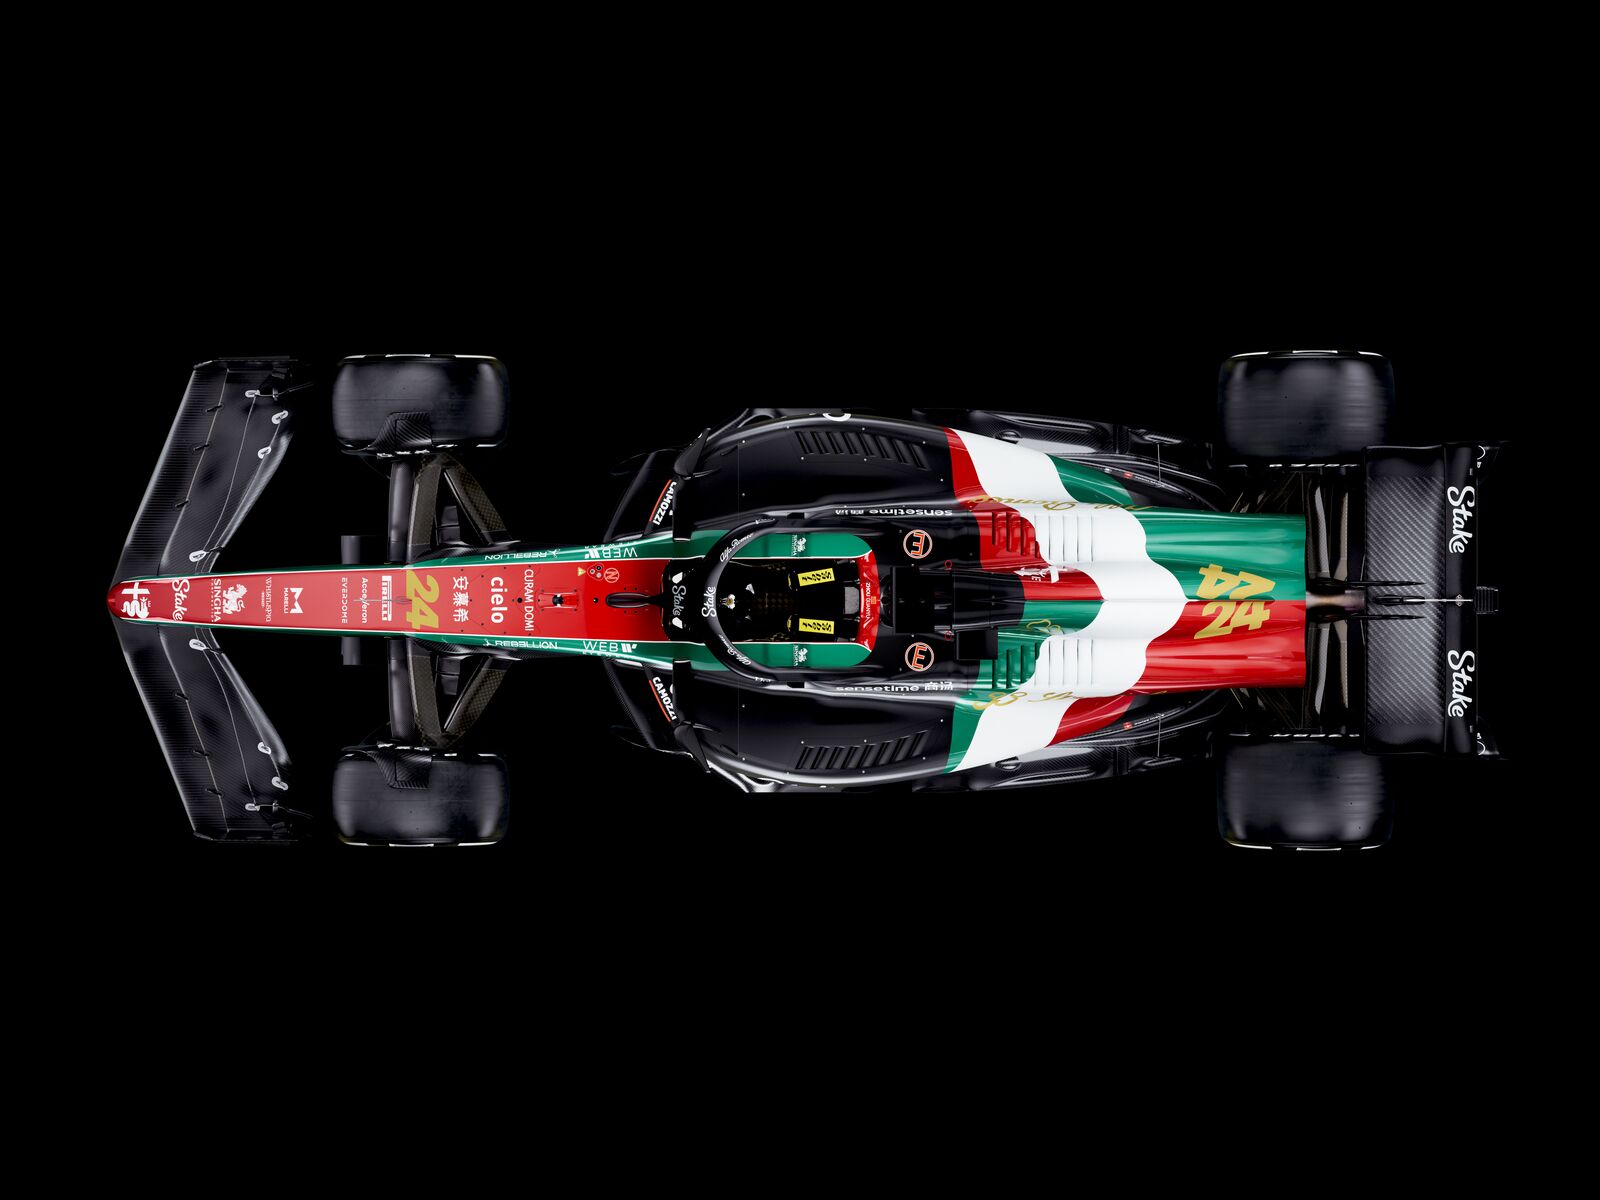 Alfa Romeo F1 Team Stake will pay tribute to the launch of Alfa Romeo’s latest fuoriserie car, the new 33 Stradale, with a head-turning livery for its C43 cars at the Italian Grand Prix